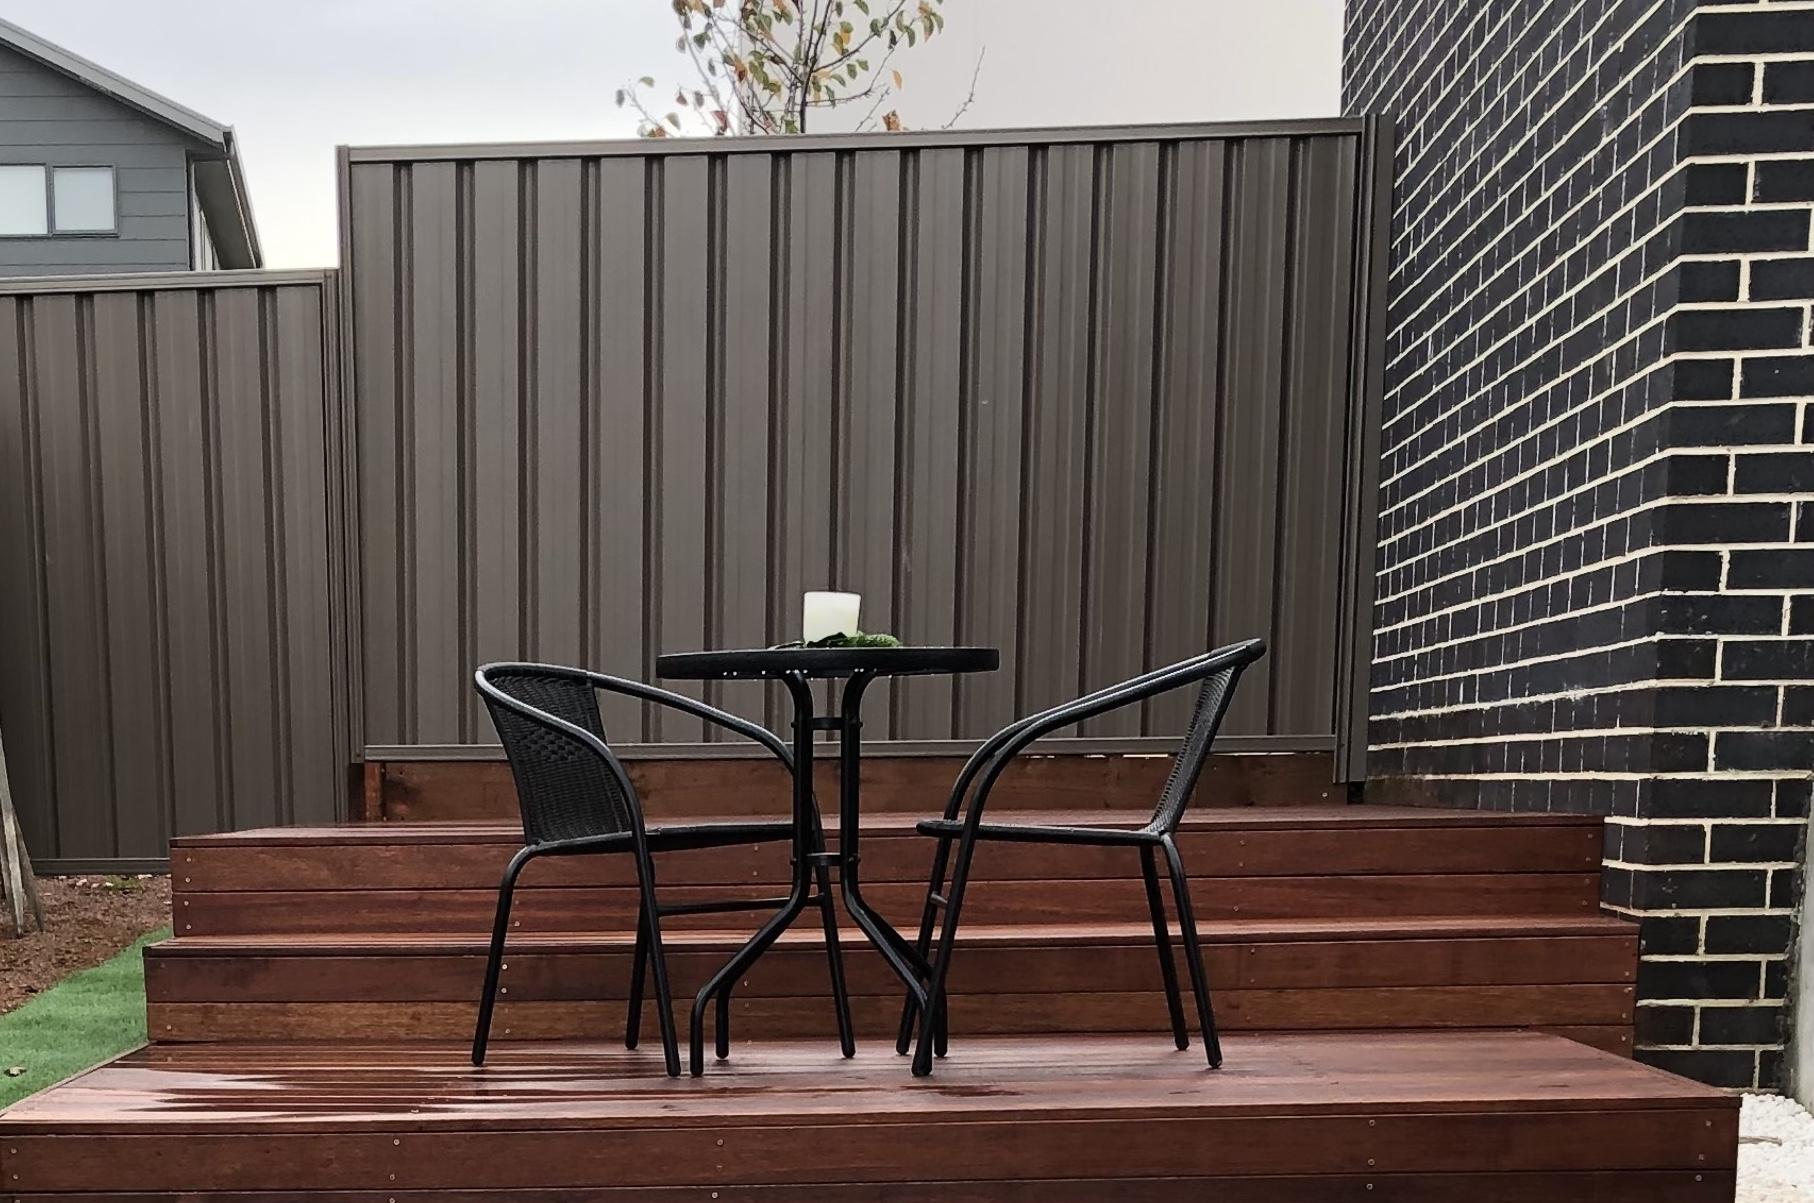 Kiran from Moncrieff, ACT loves COLORBOND® steel. Fencing made from COLORBOND® steel in the colour Jasper®